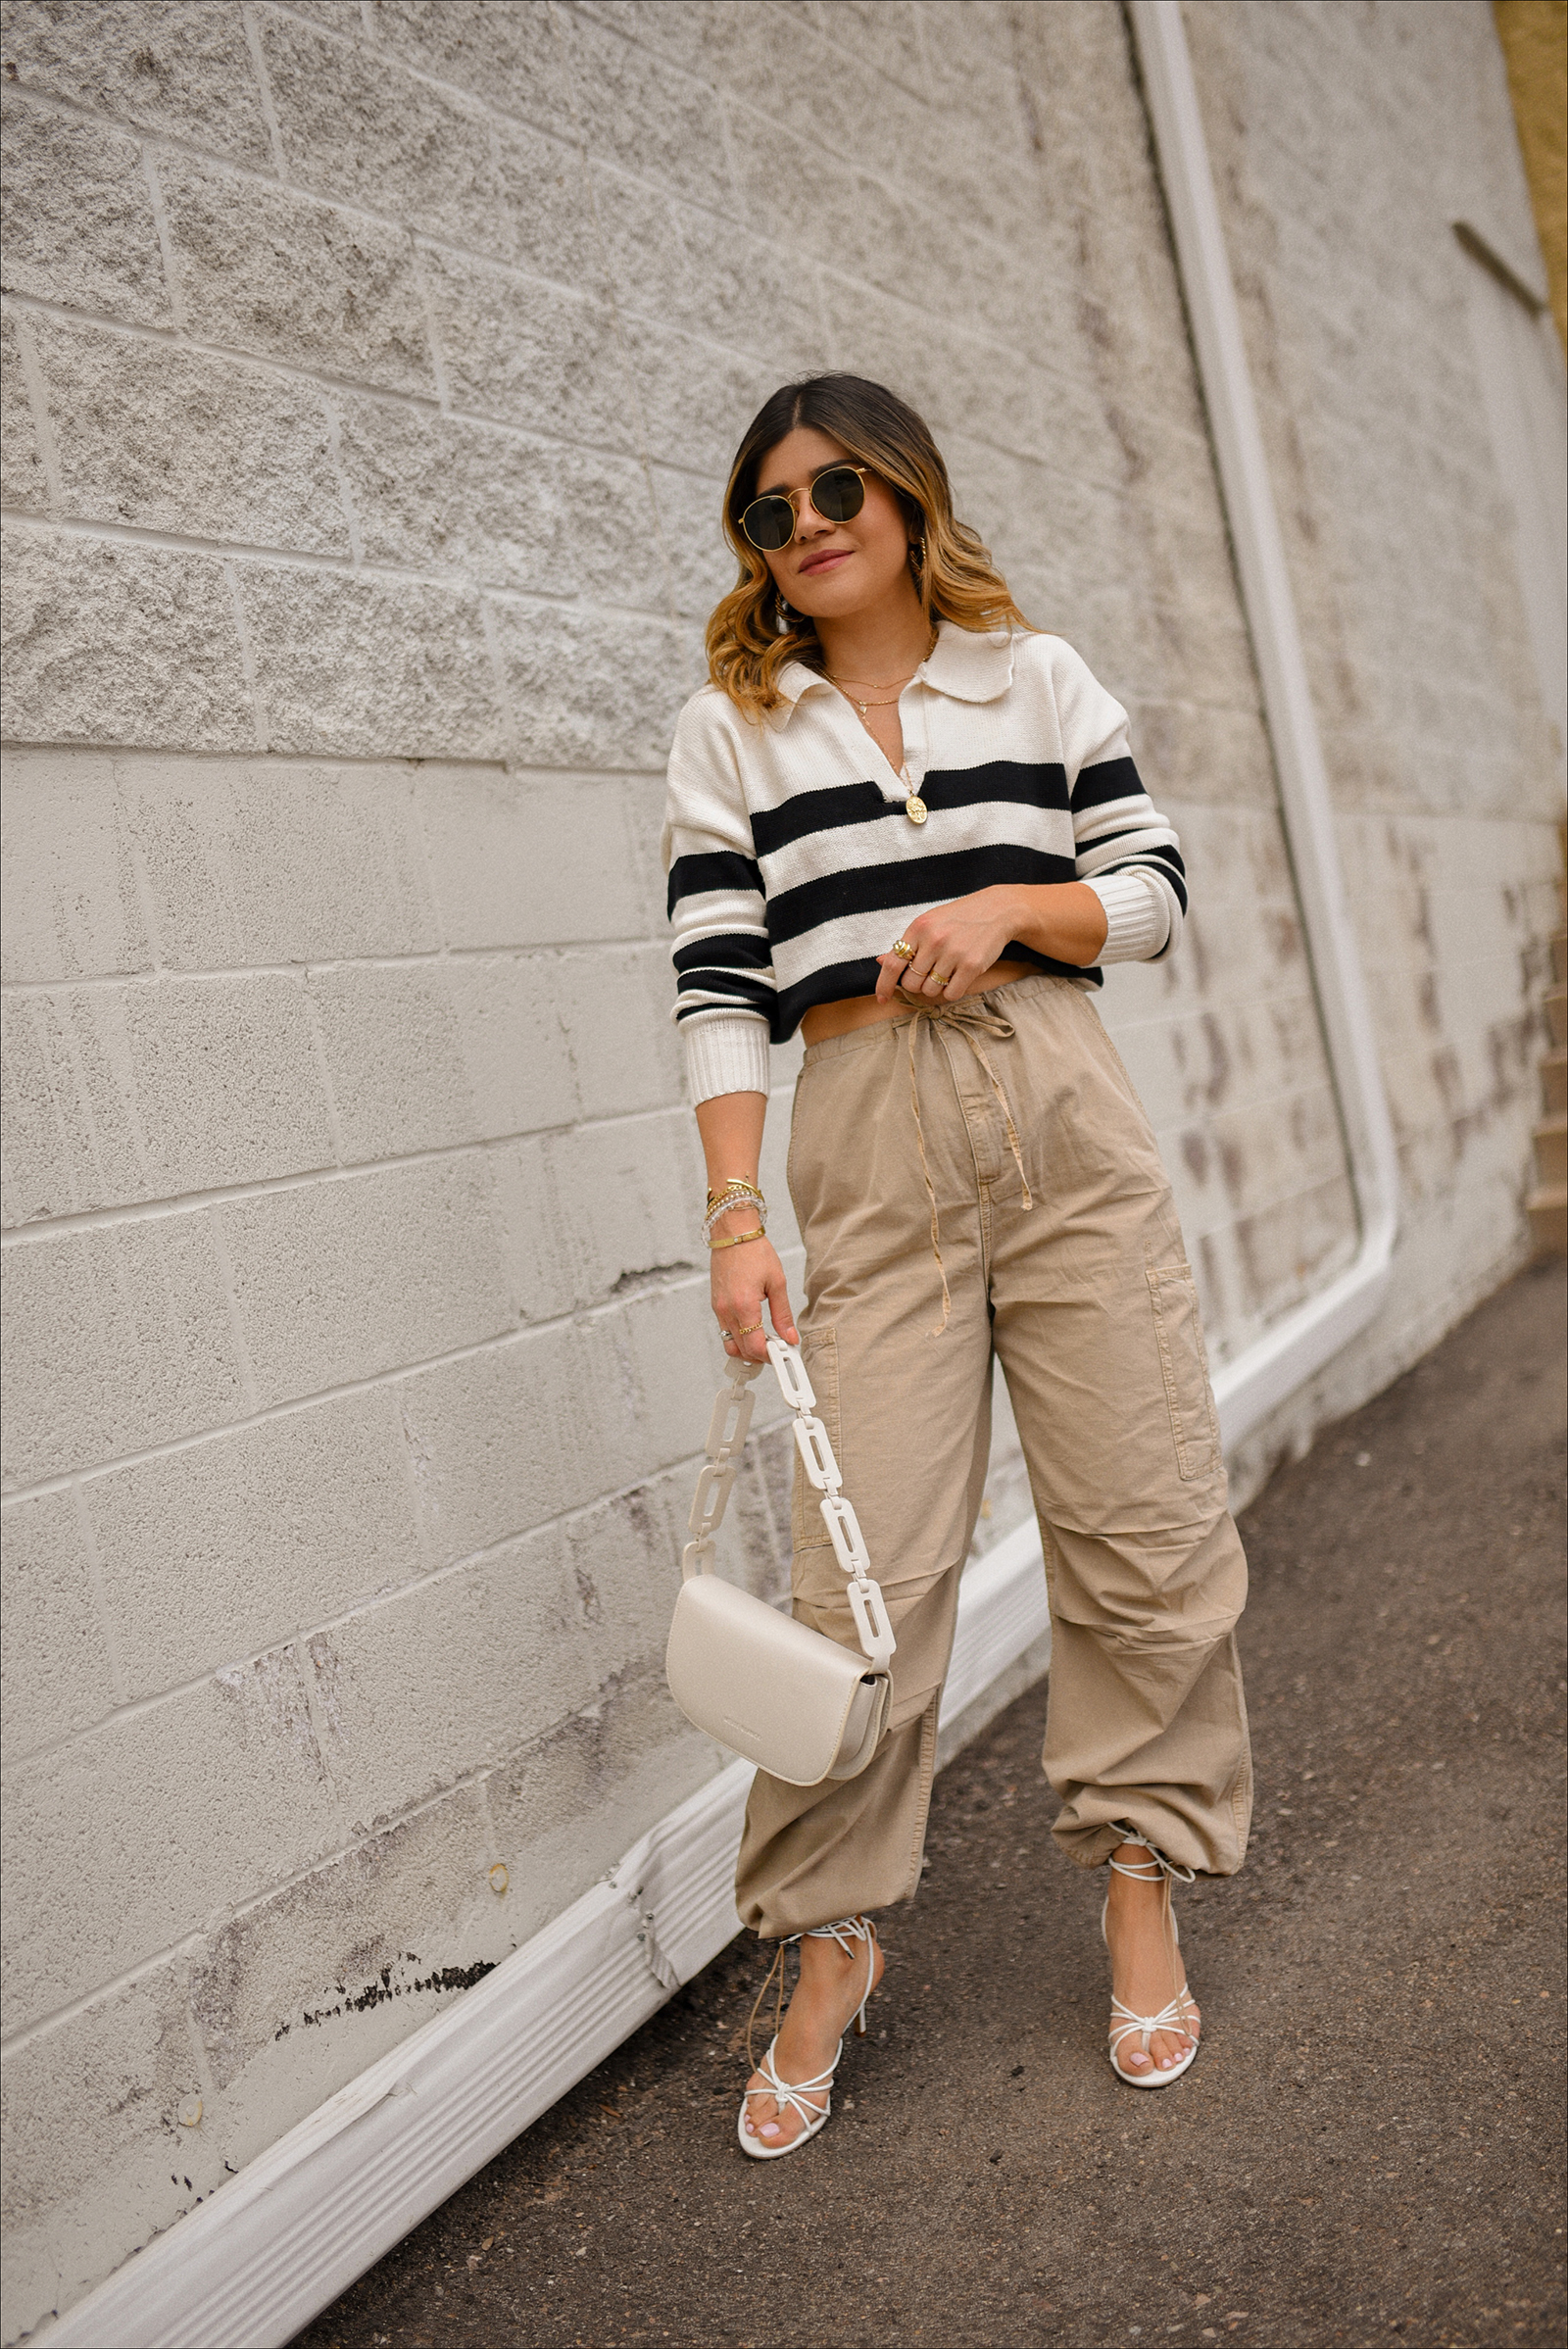 how do i style brown parachute pants? : r/fashion